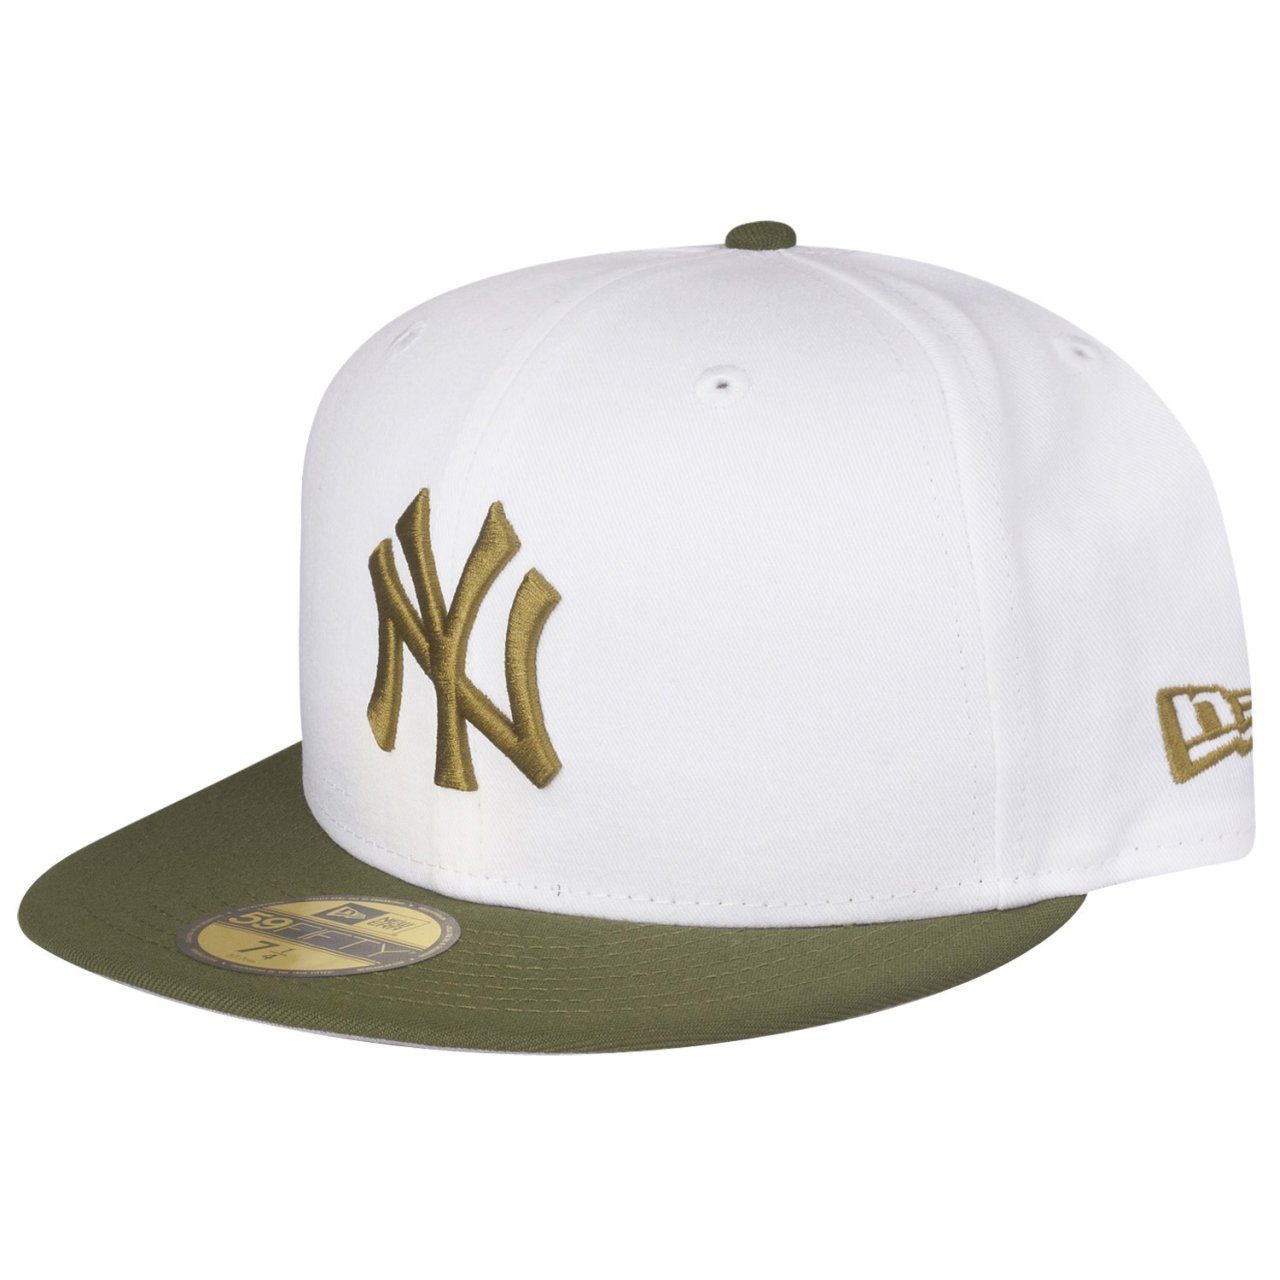 Cap Era 59Fifty New Fitted MLB York Yankees New